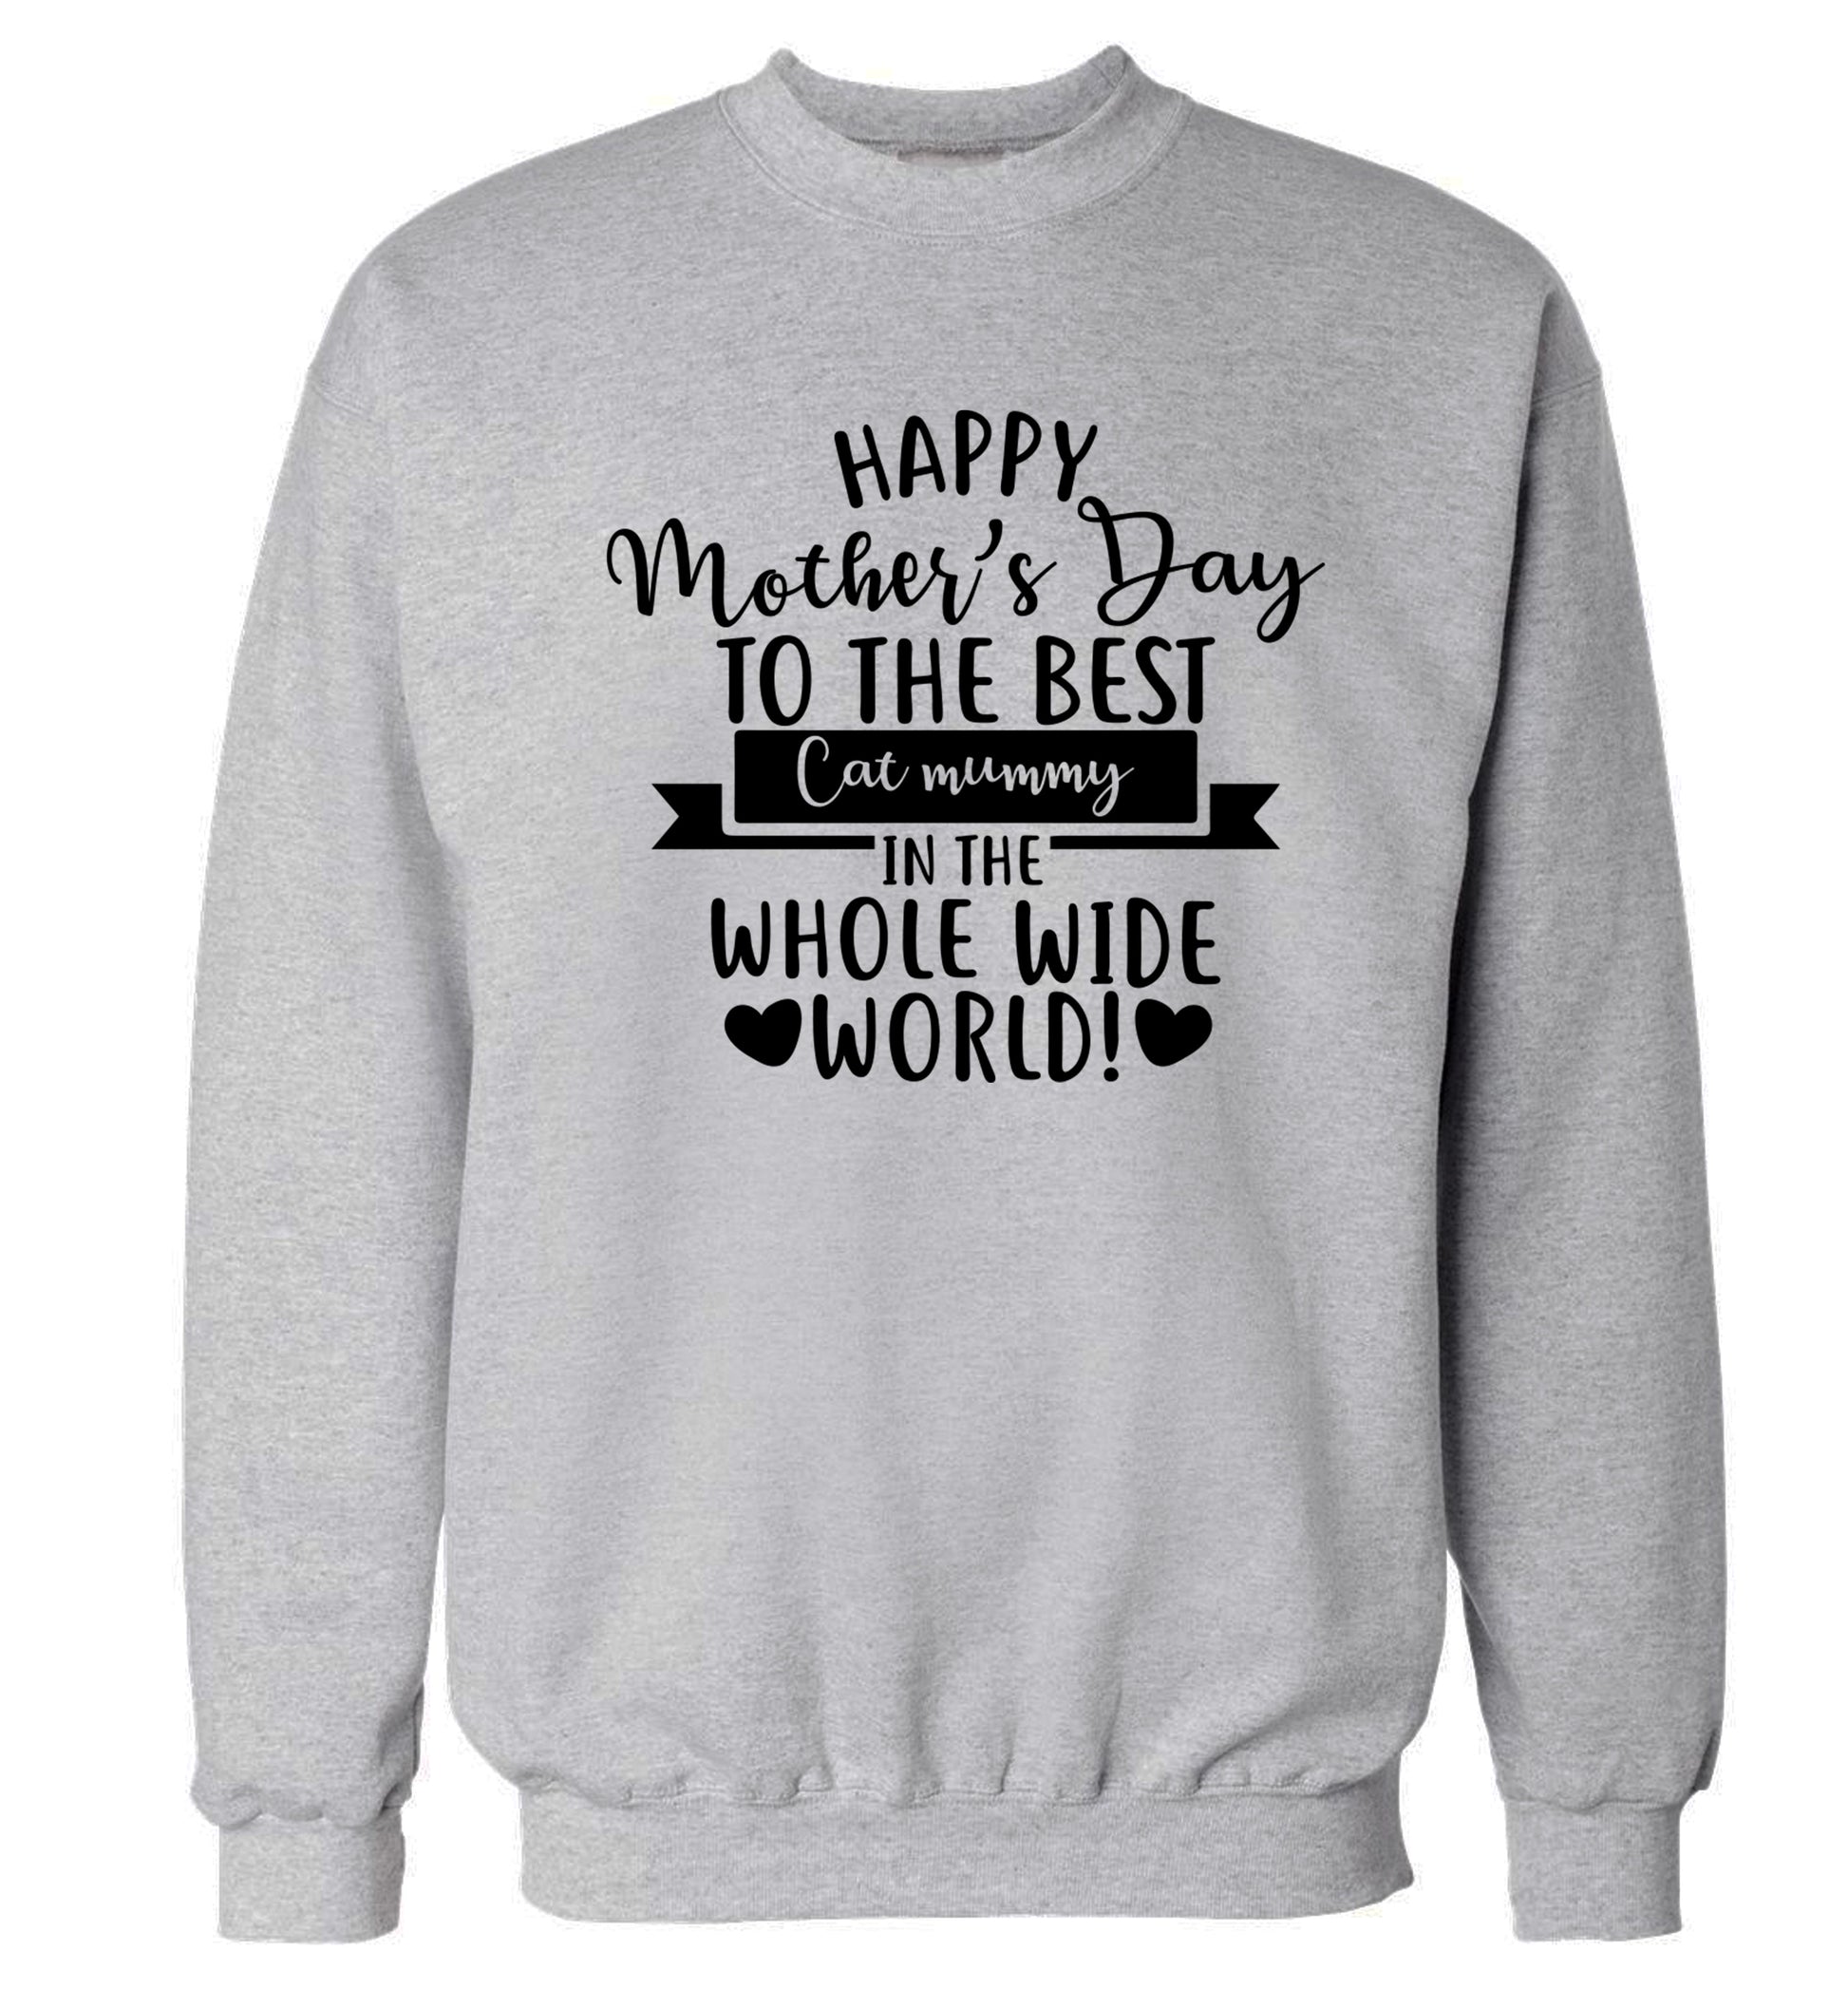 Happy mother's day to the best cat mummy in the world Adult's unisex grey Sweater 2XL